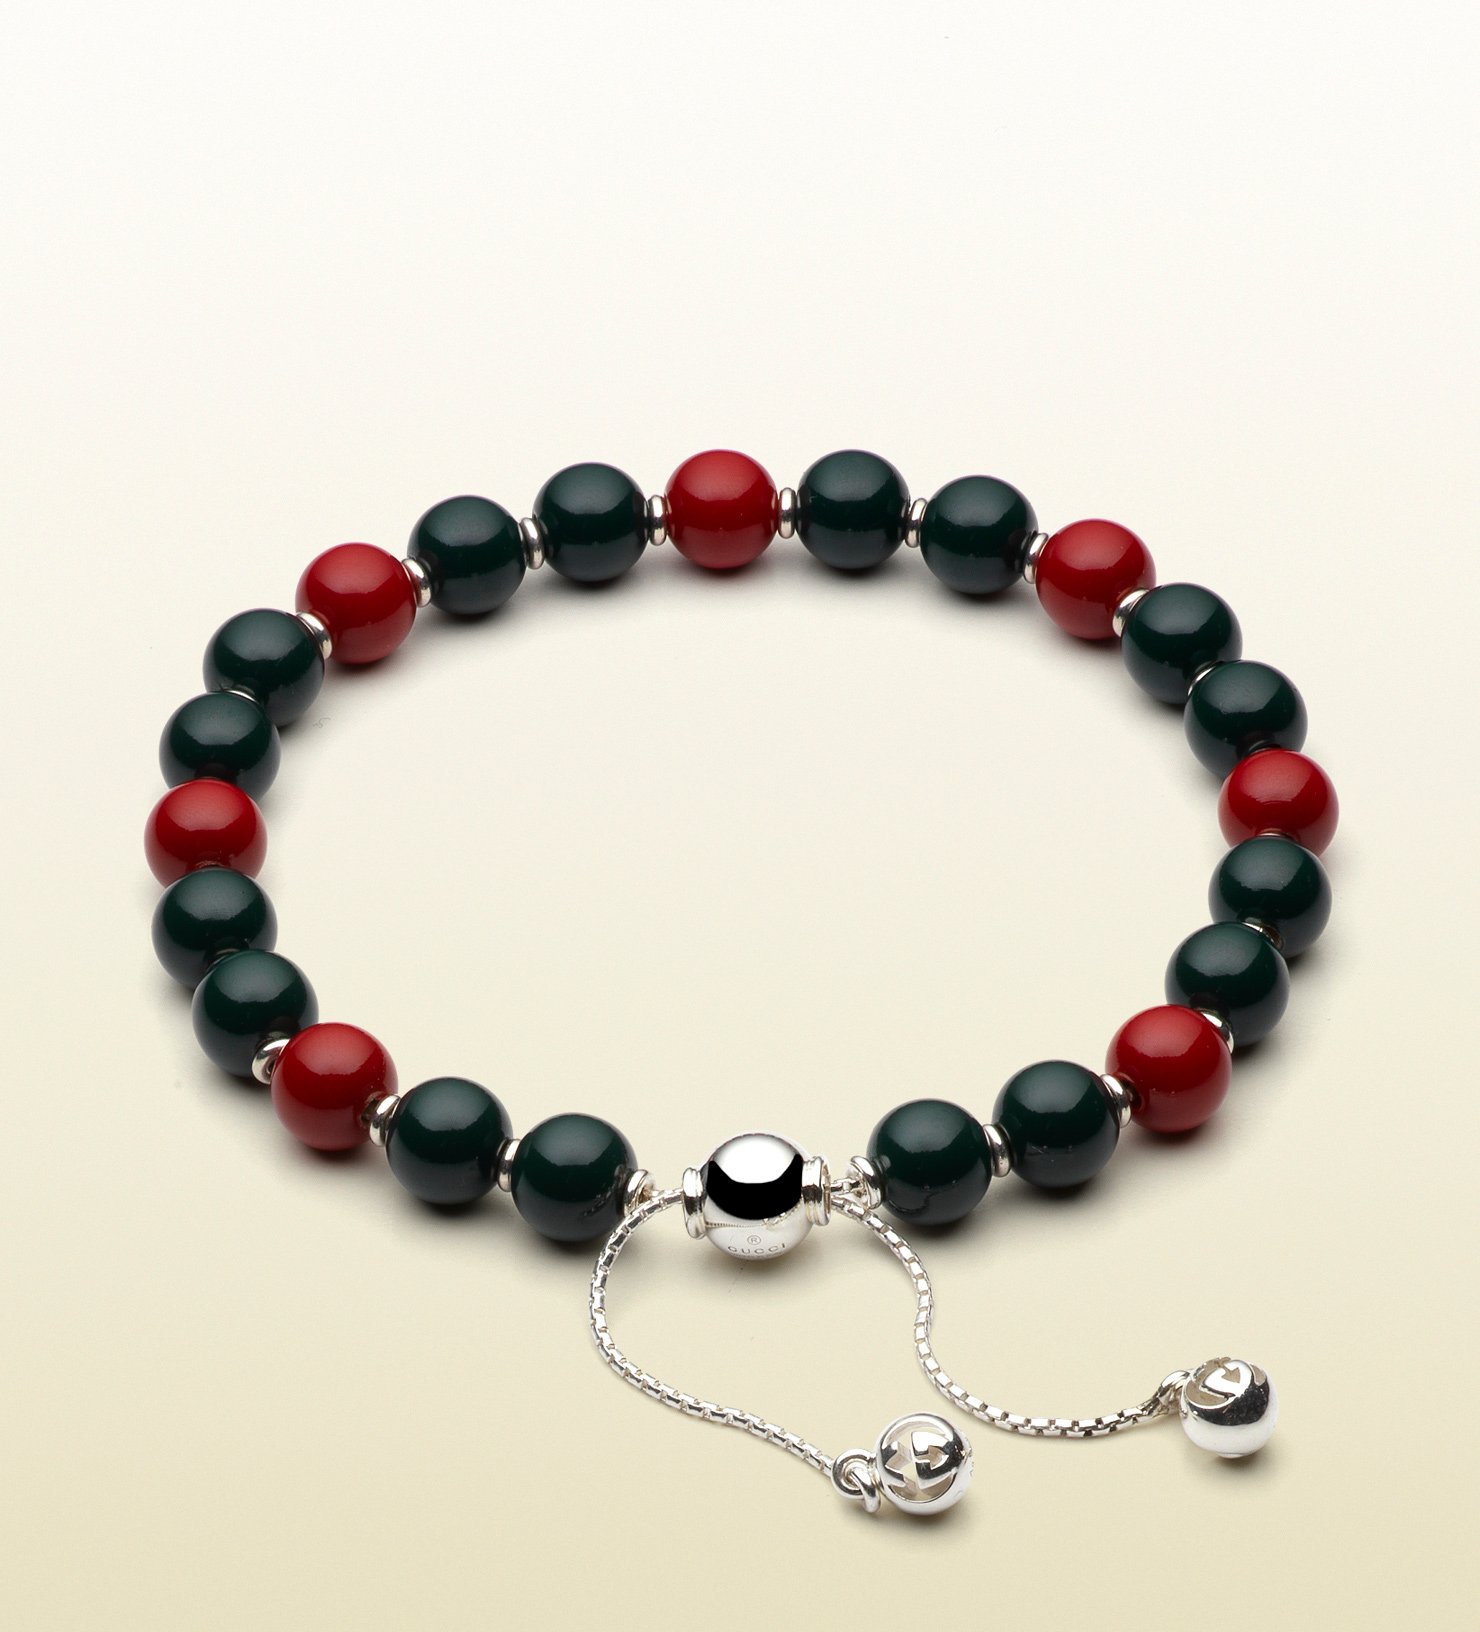 Gucci Bracelet With Green And Red Wooden Beads for Men